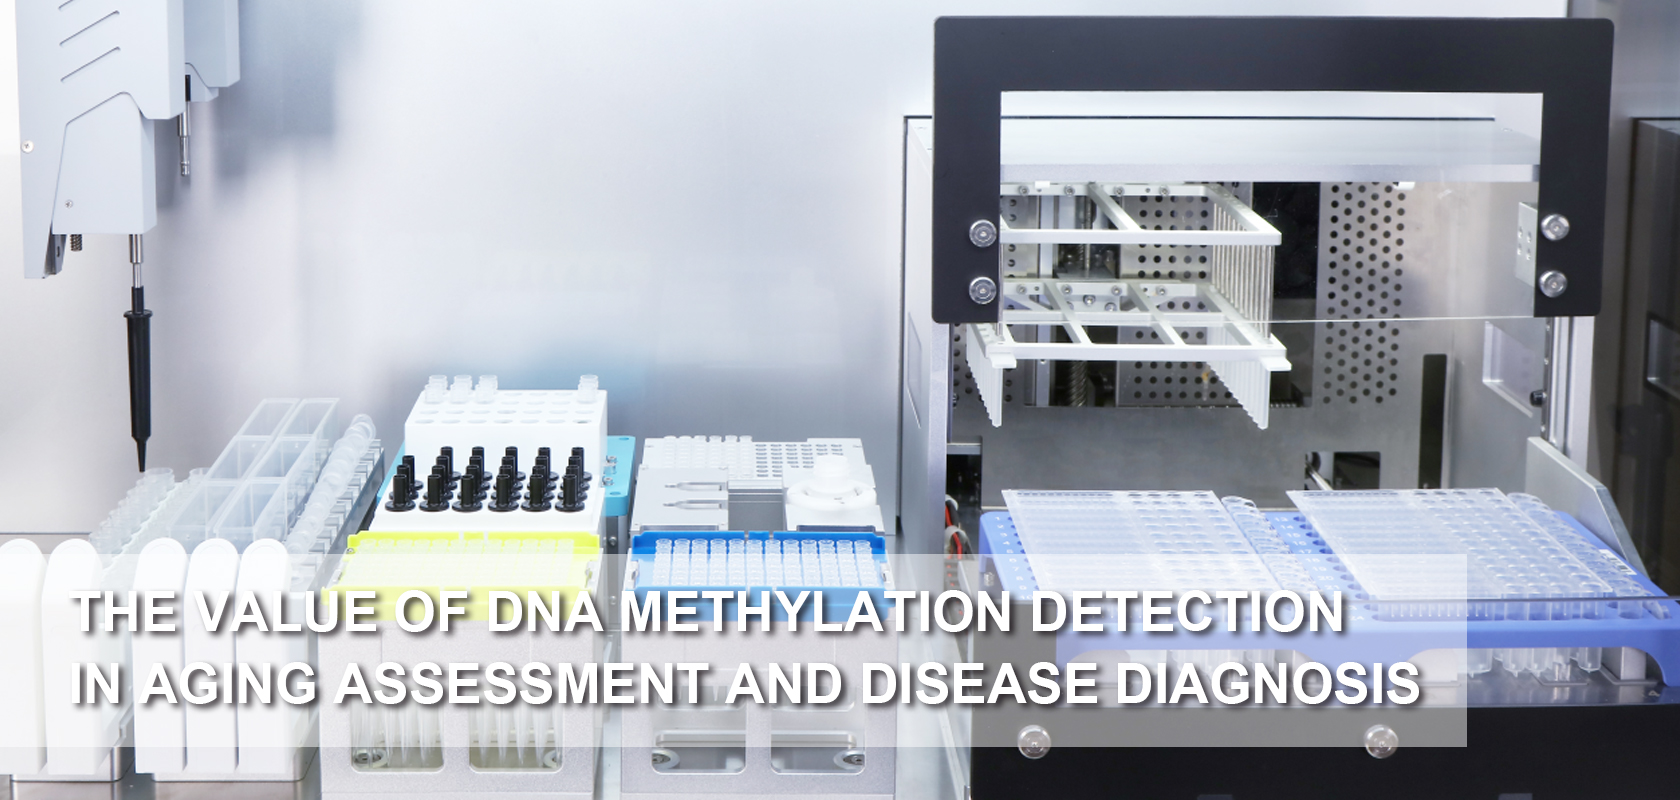 The Value of DNA Methylation Detection in Aging Assessment and Disease Diagnosis